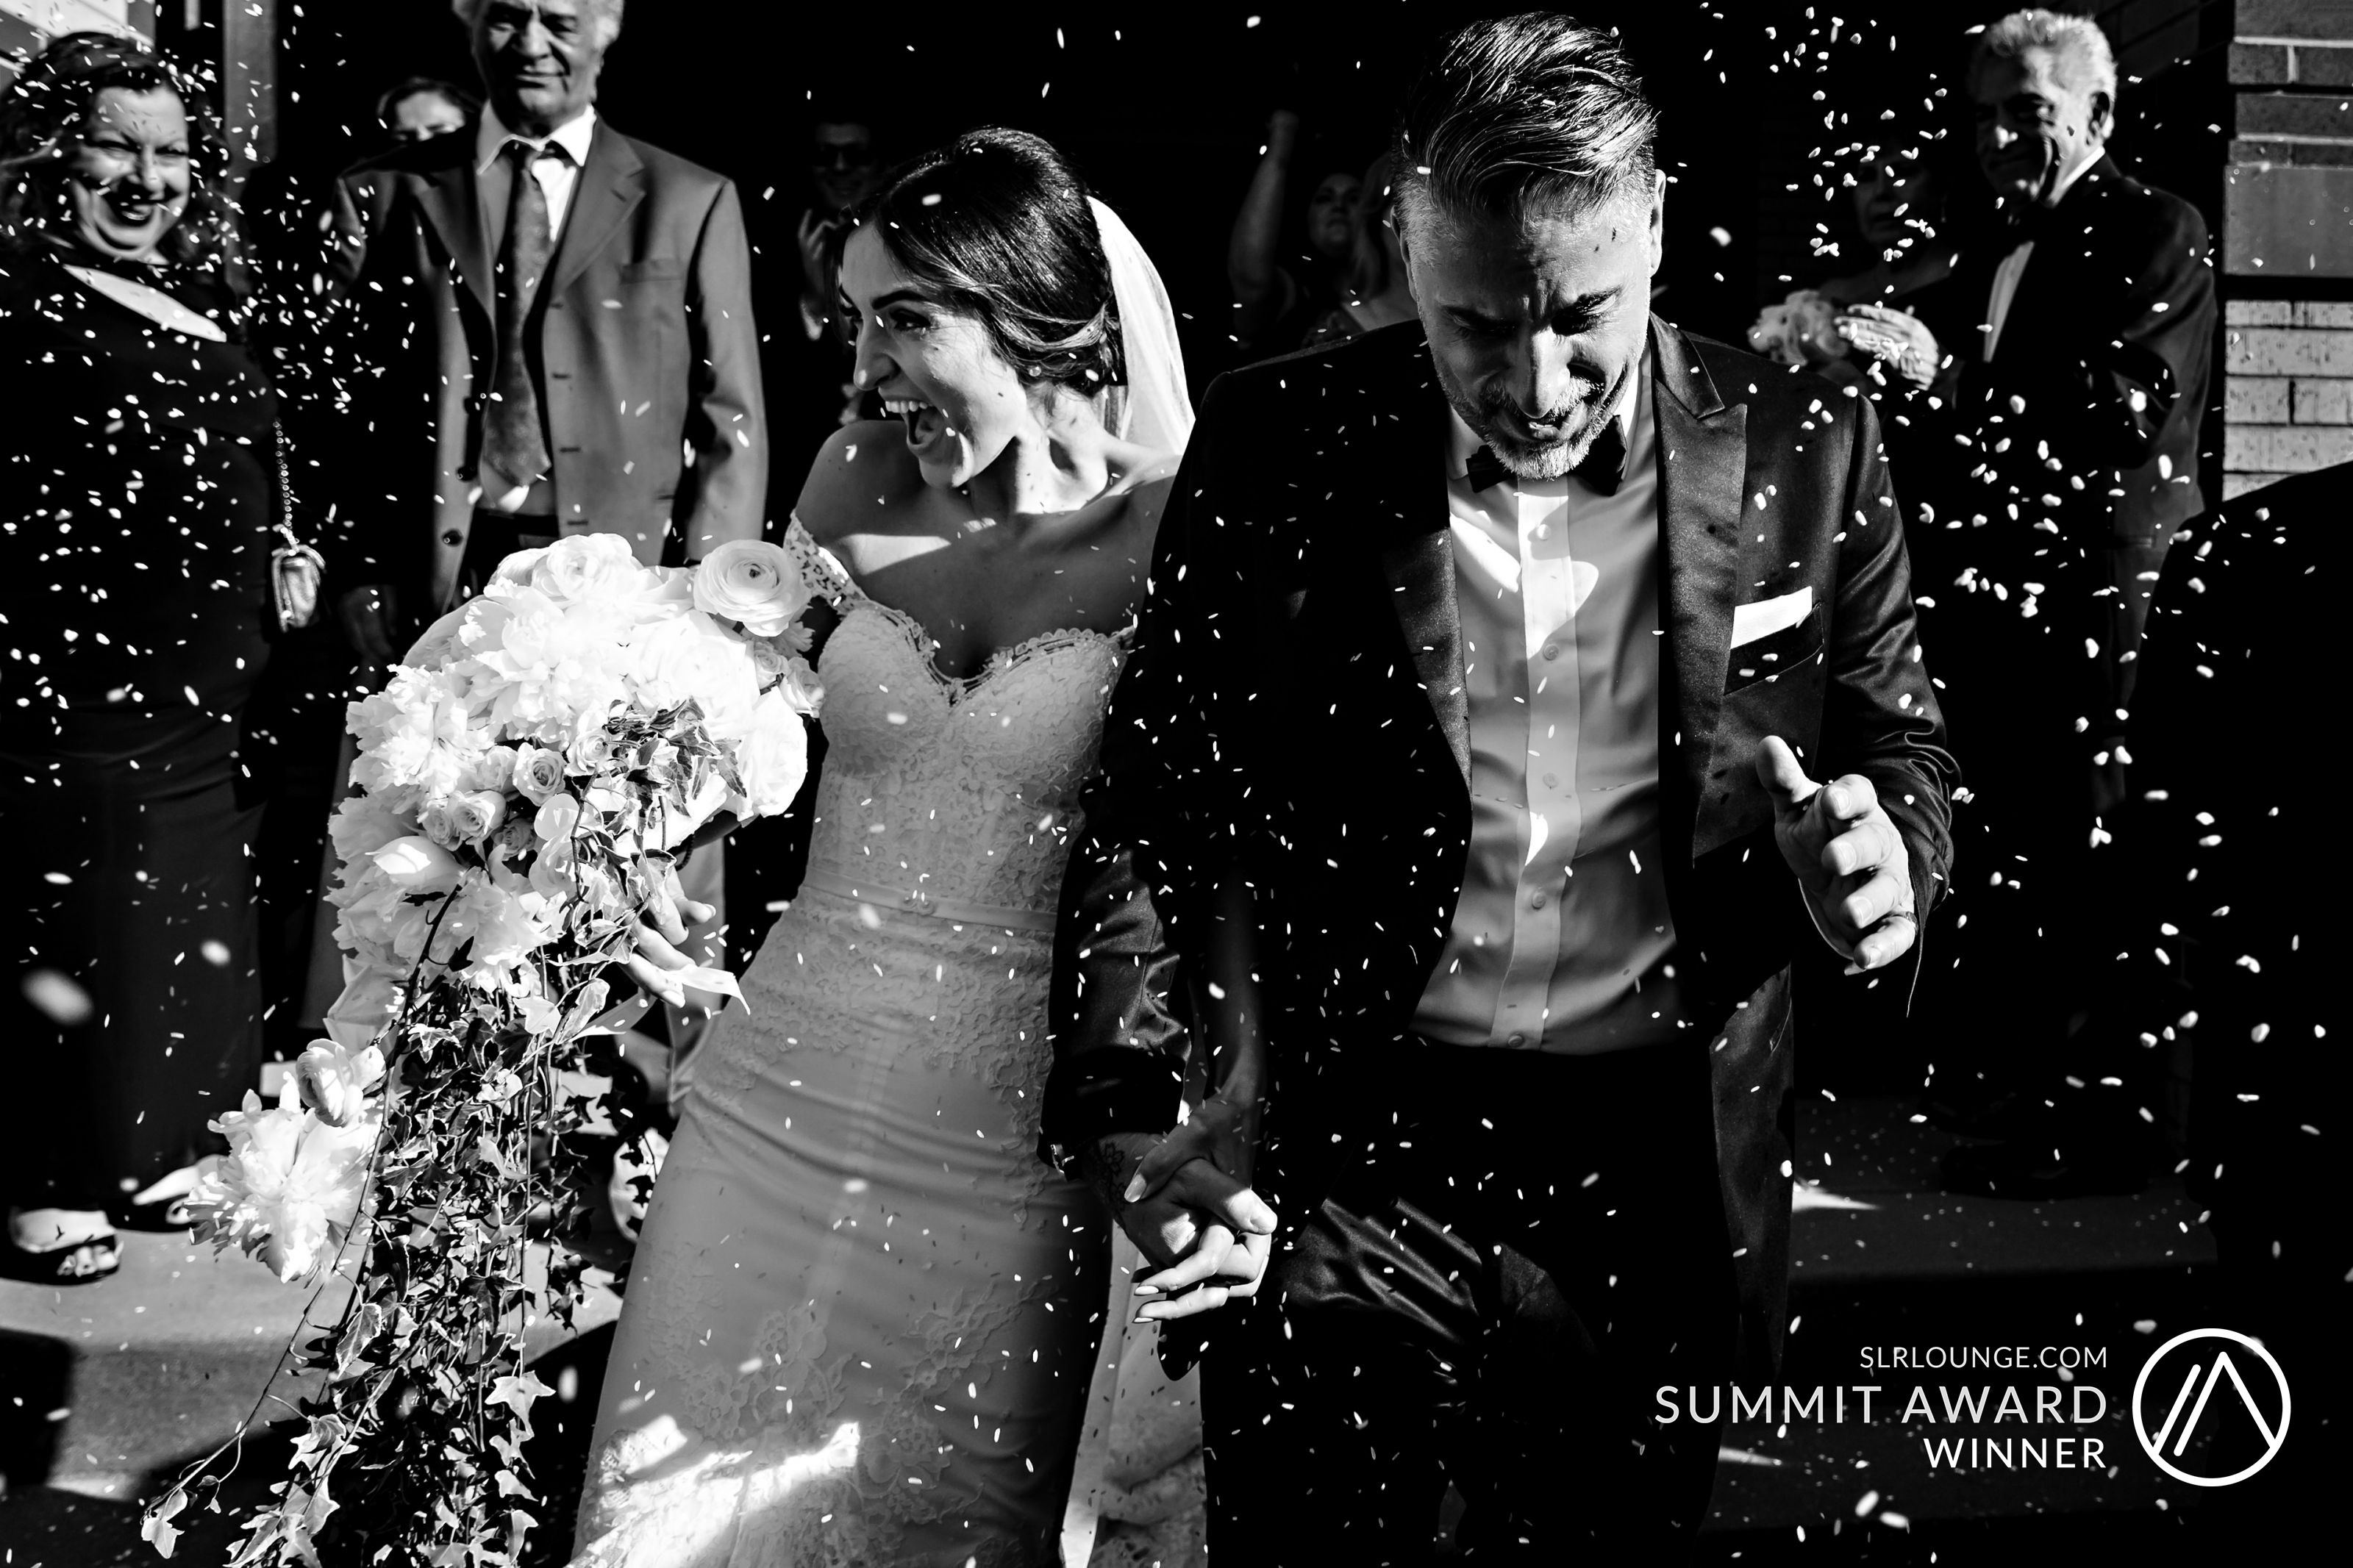 Award winning image from Maine Wedding Photographer I AM SARAH V for this image of the newlyweds exiting their Greek Orthodox ceremony under a sea of falling rice